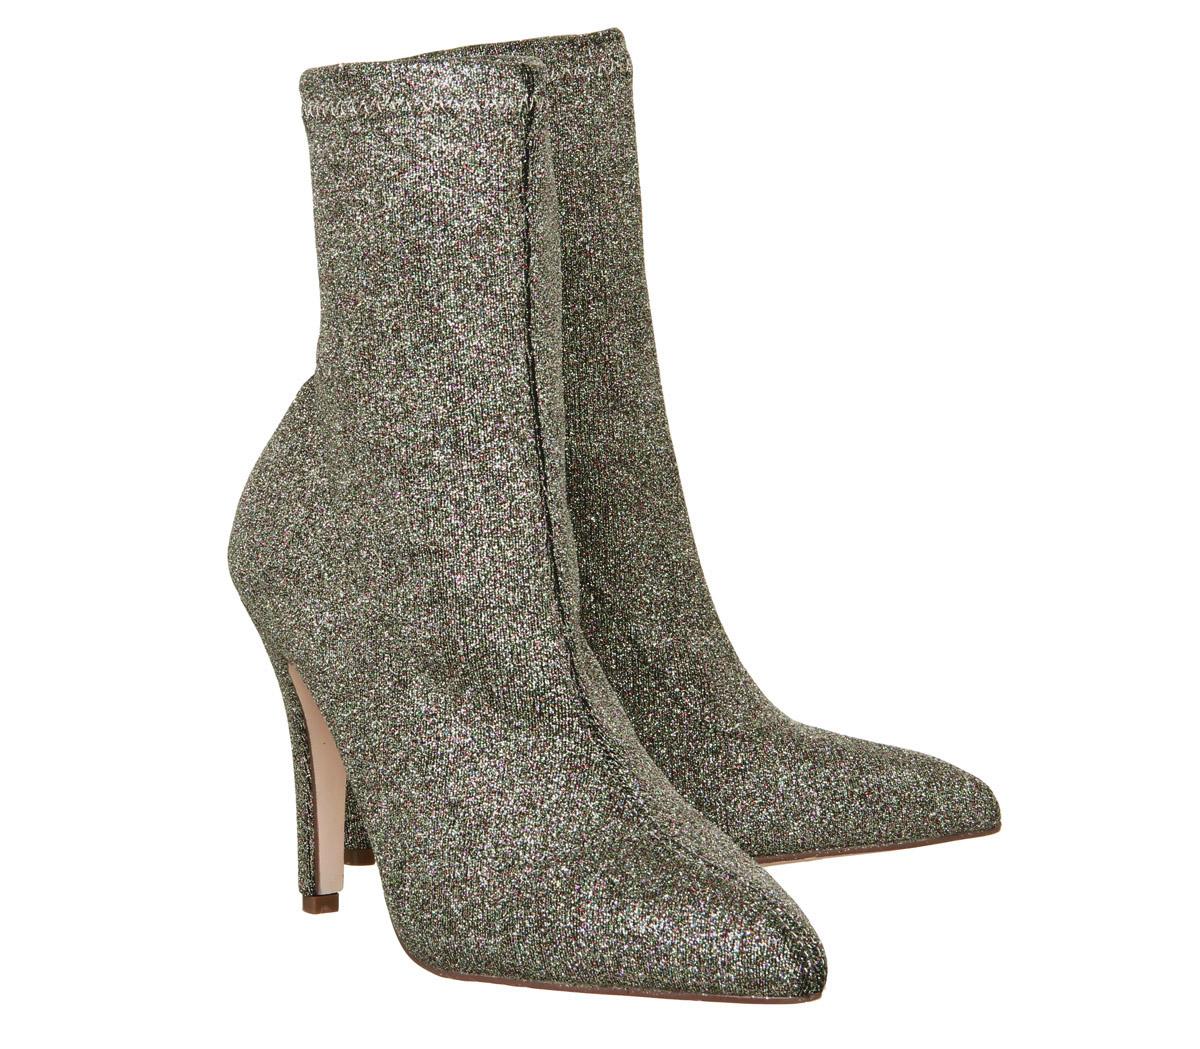 OFFICE Almighty Pointed Sock Boots Multi Glitter - Women's Boots